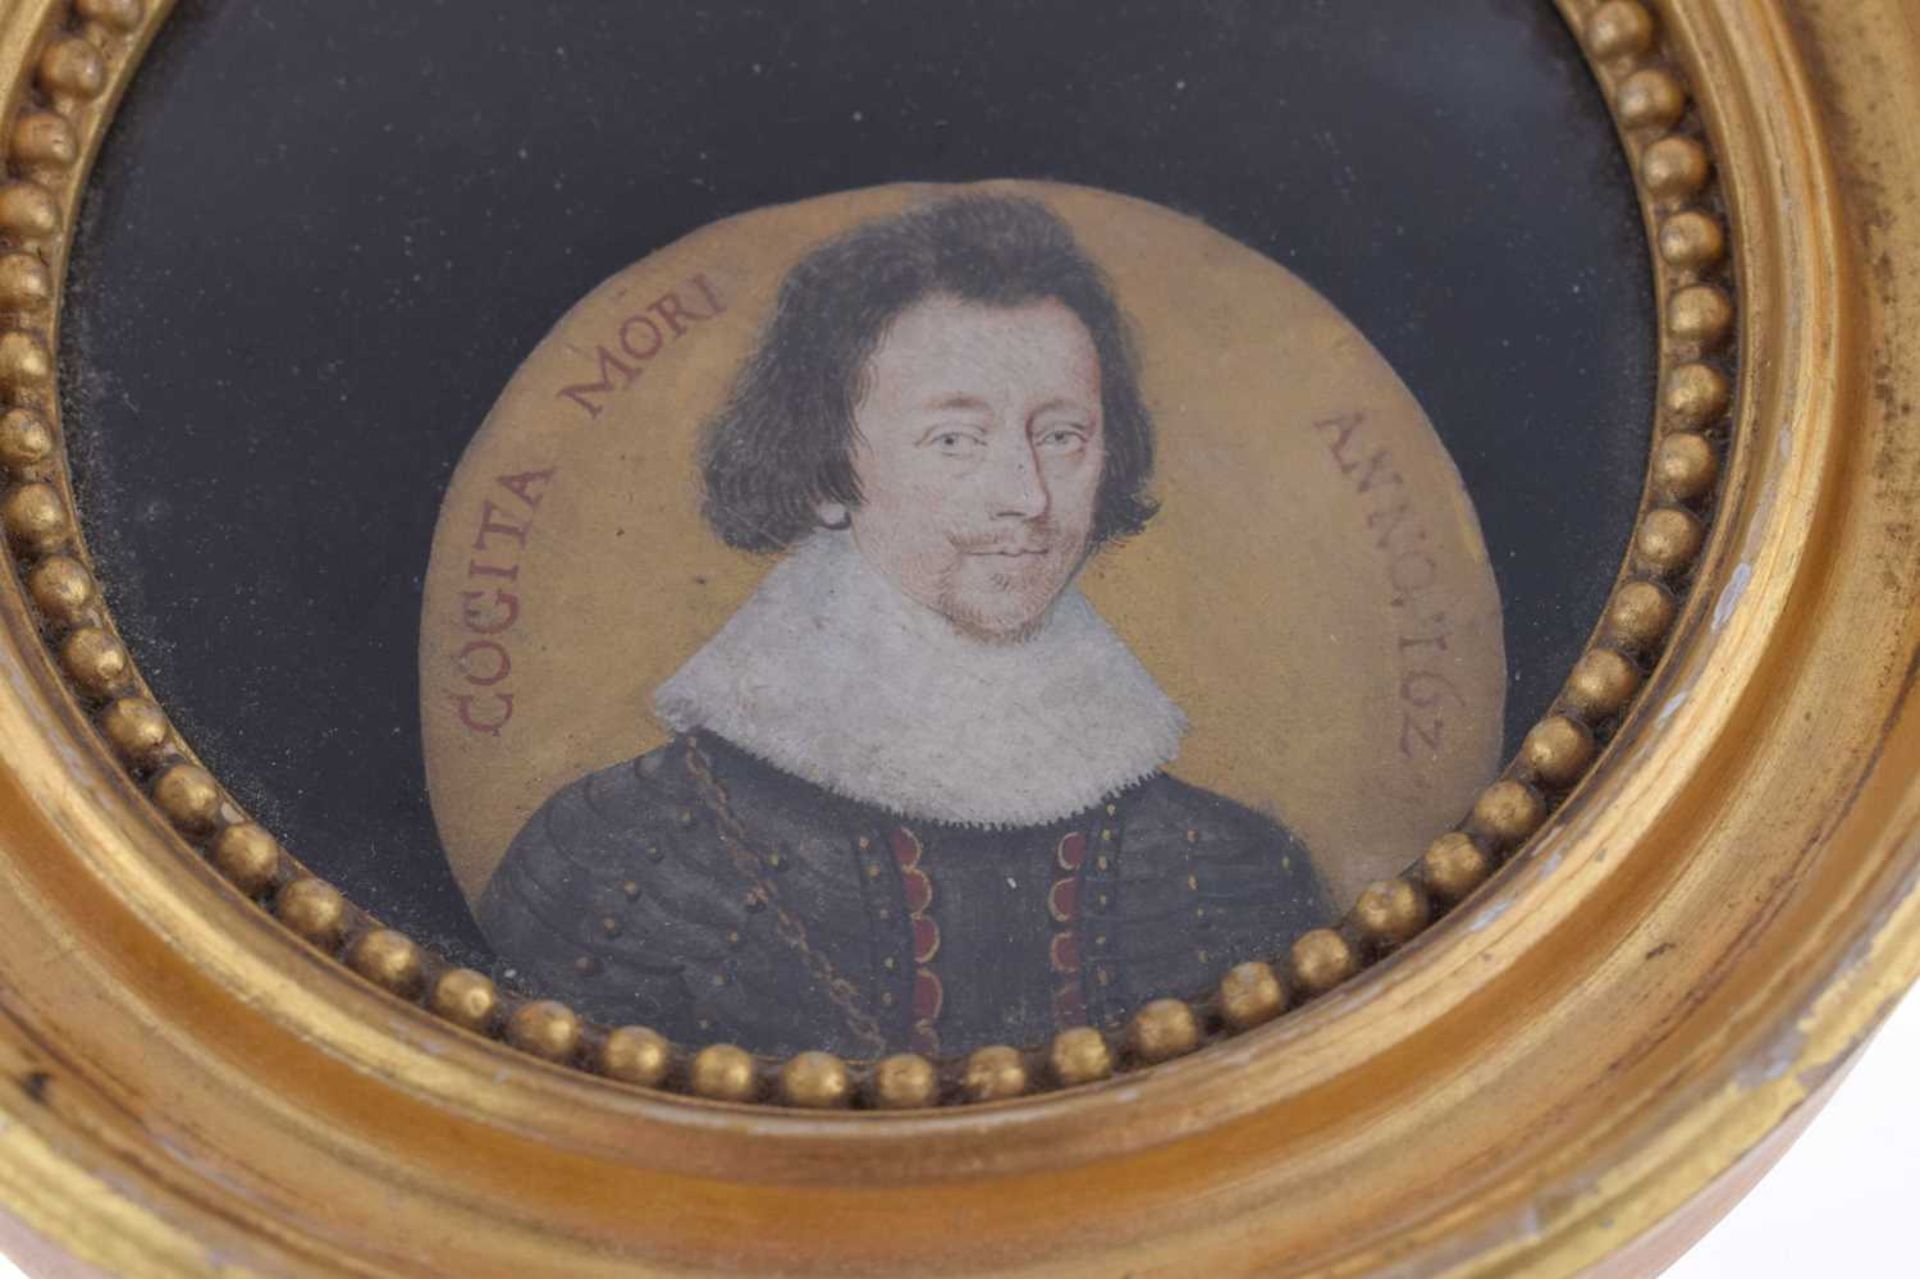 17th century-style portrait miniature, probably of James I - Image 3 of 8